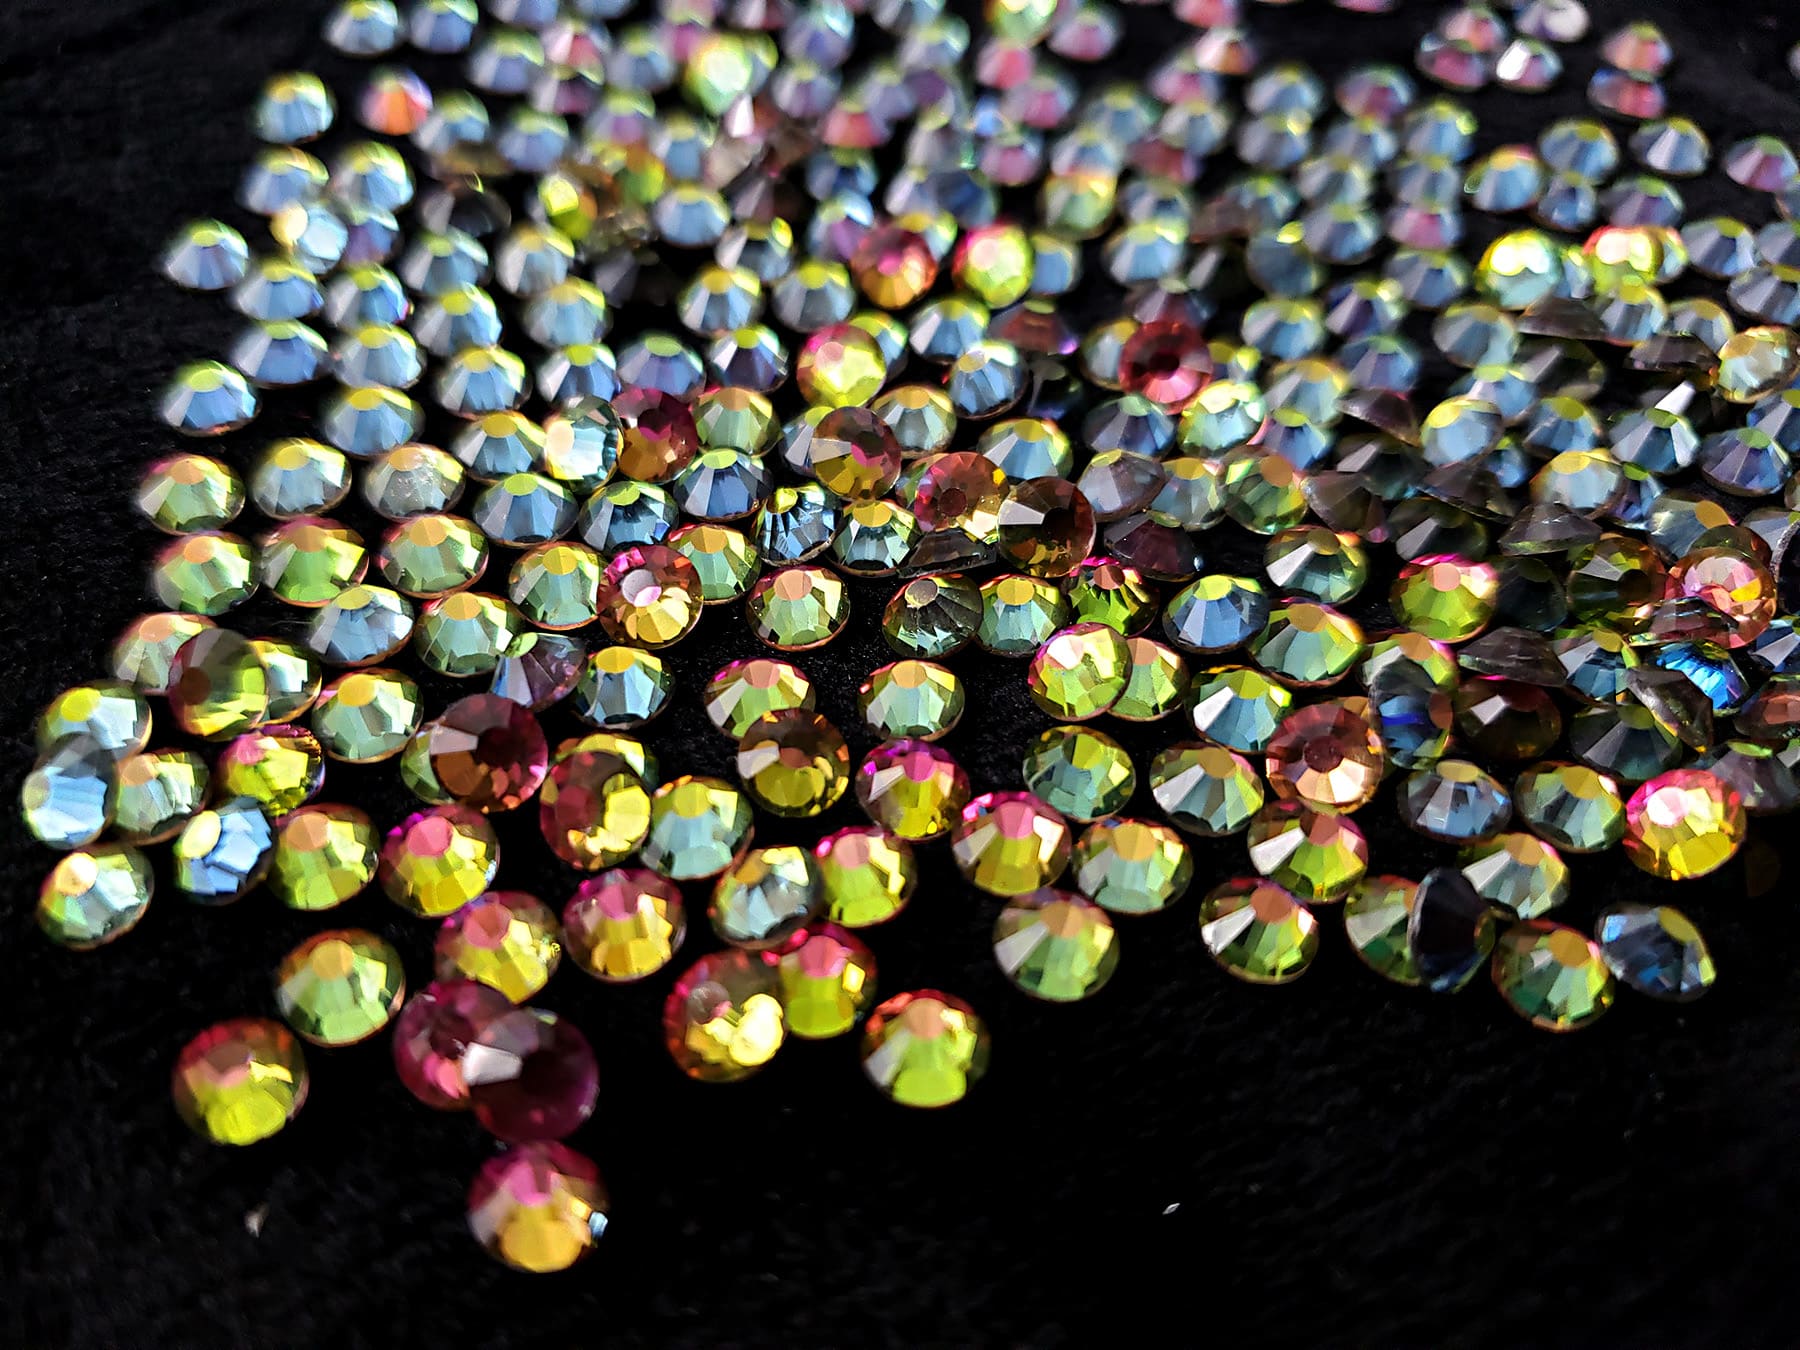 A large pile of iridescent rhinestones against a black background.